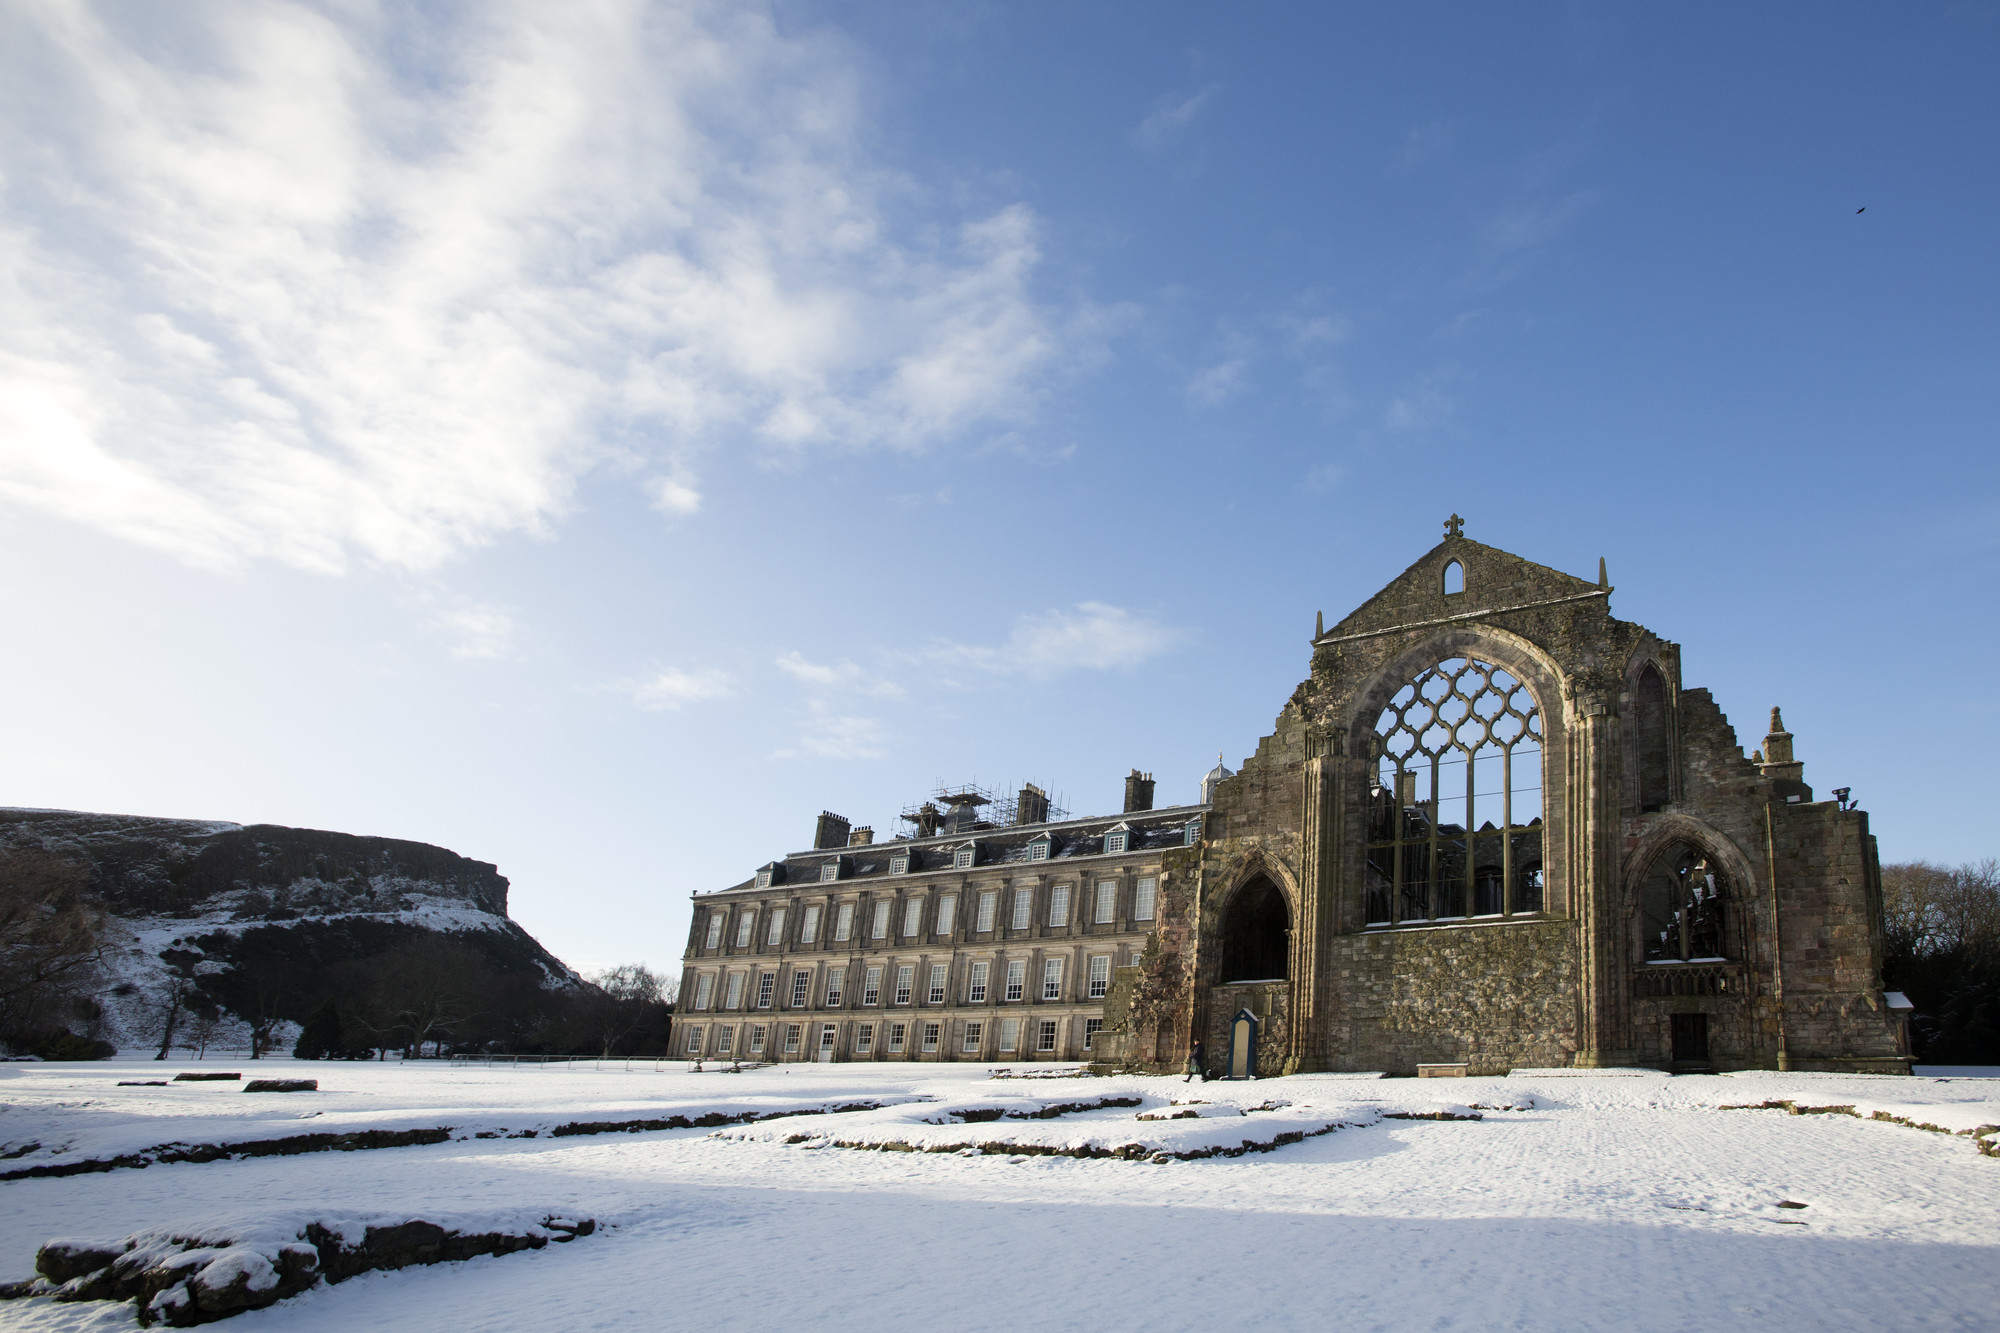 The Palace of Holyroodhouse Abbey in the snow